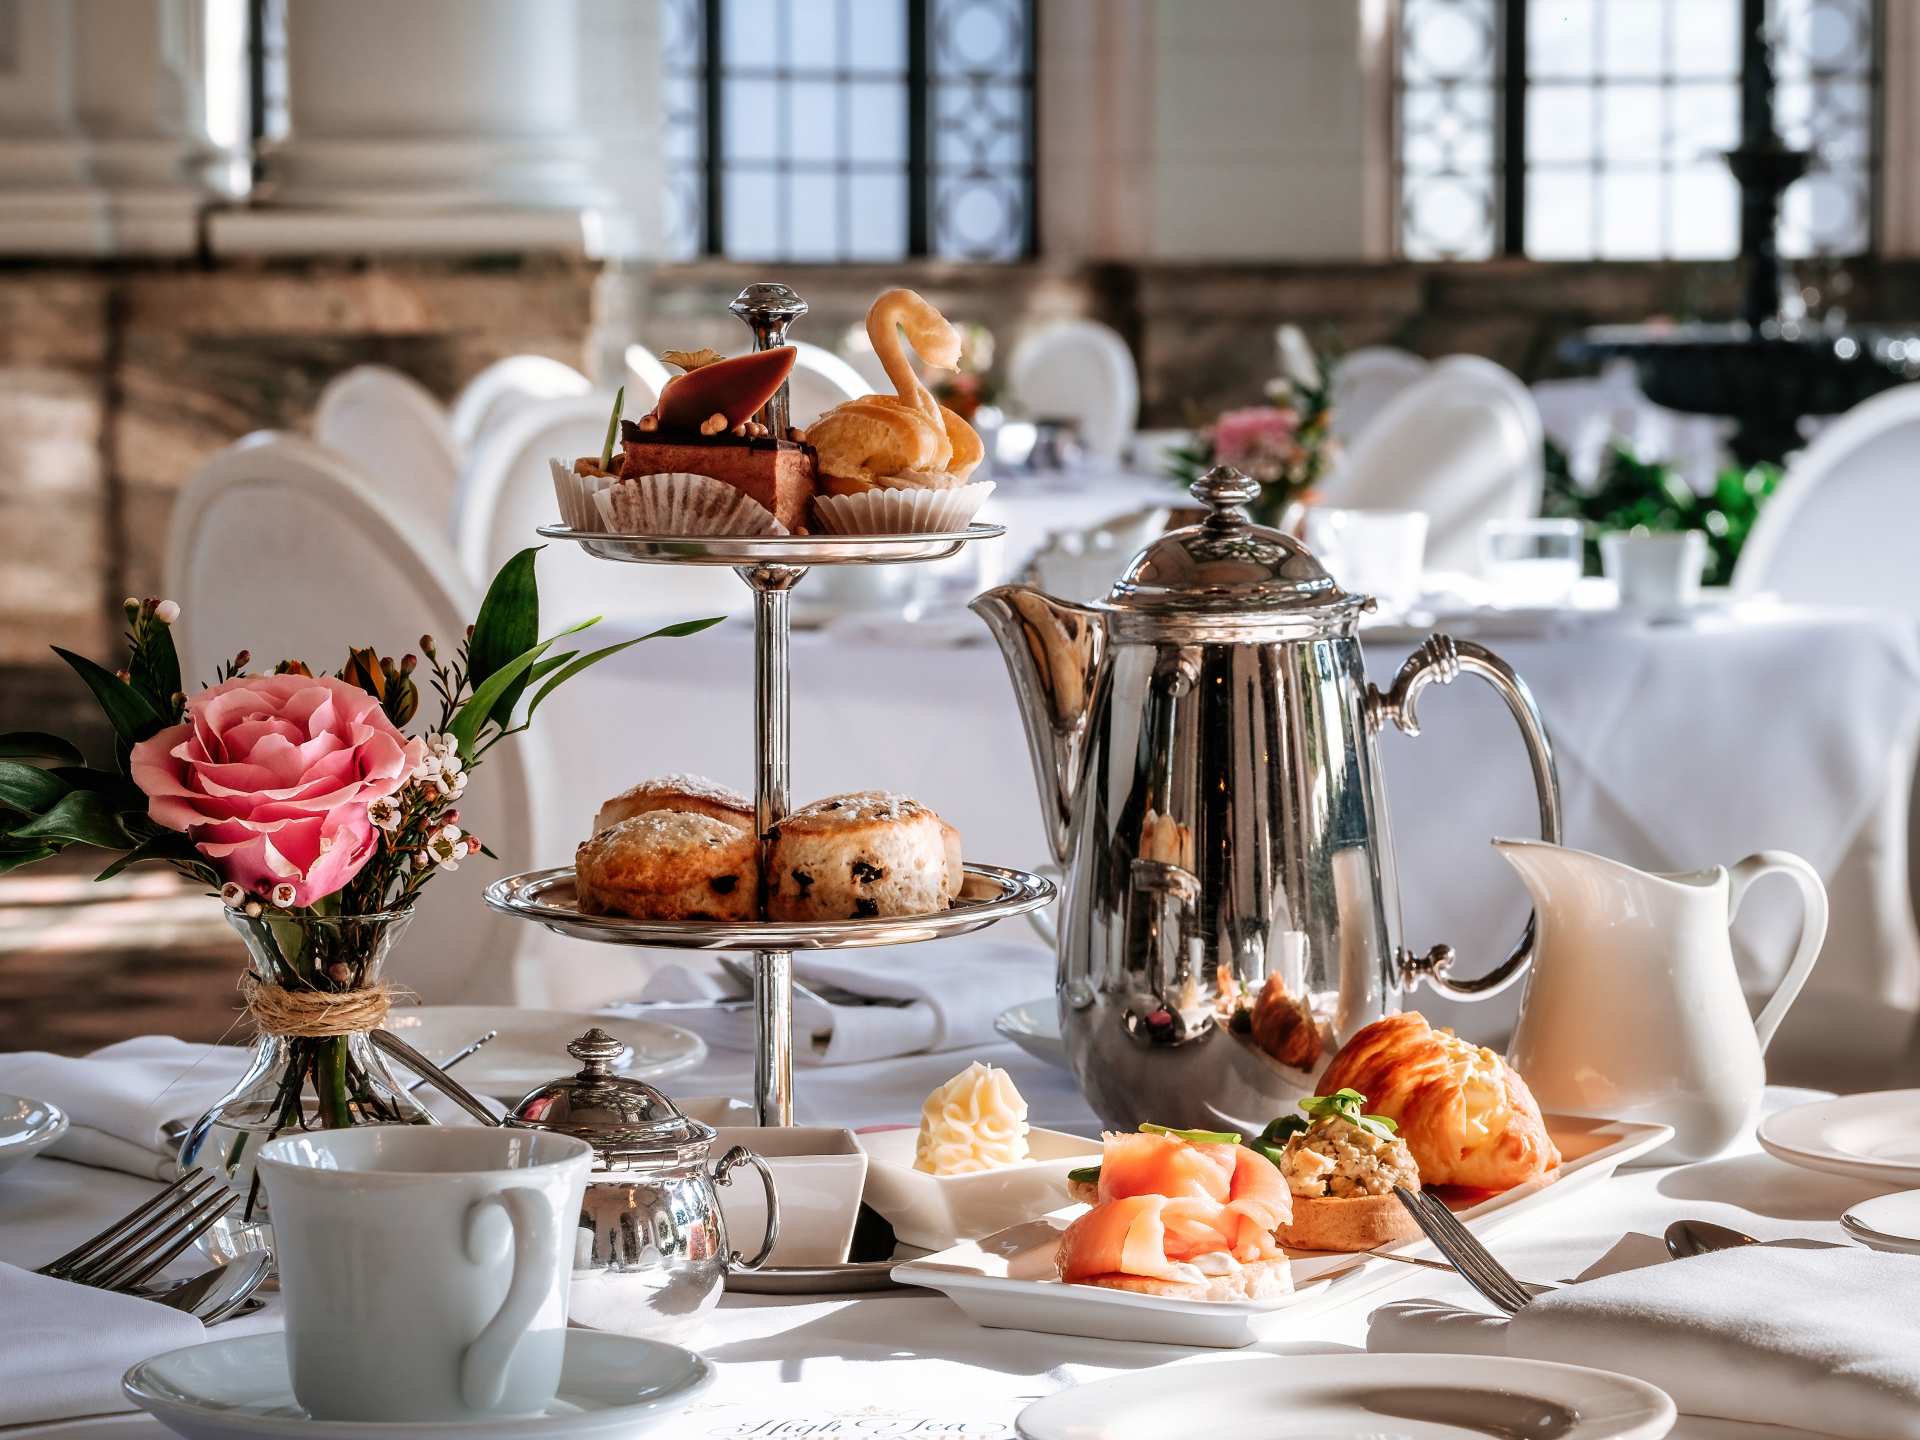 Mother's Day ideas | Mother’s Day High Tea at Casa Loma